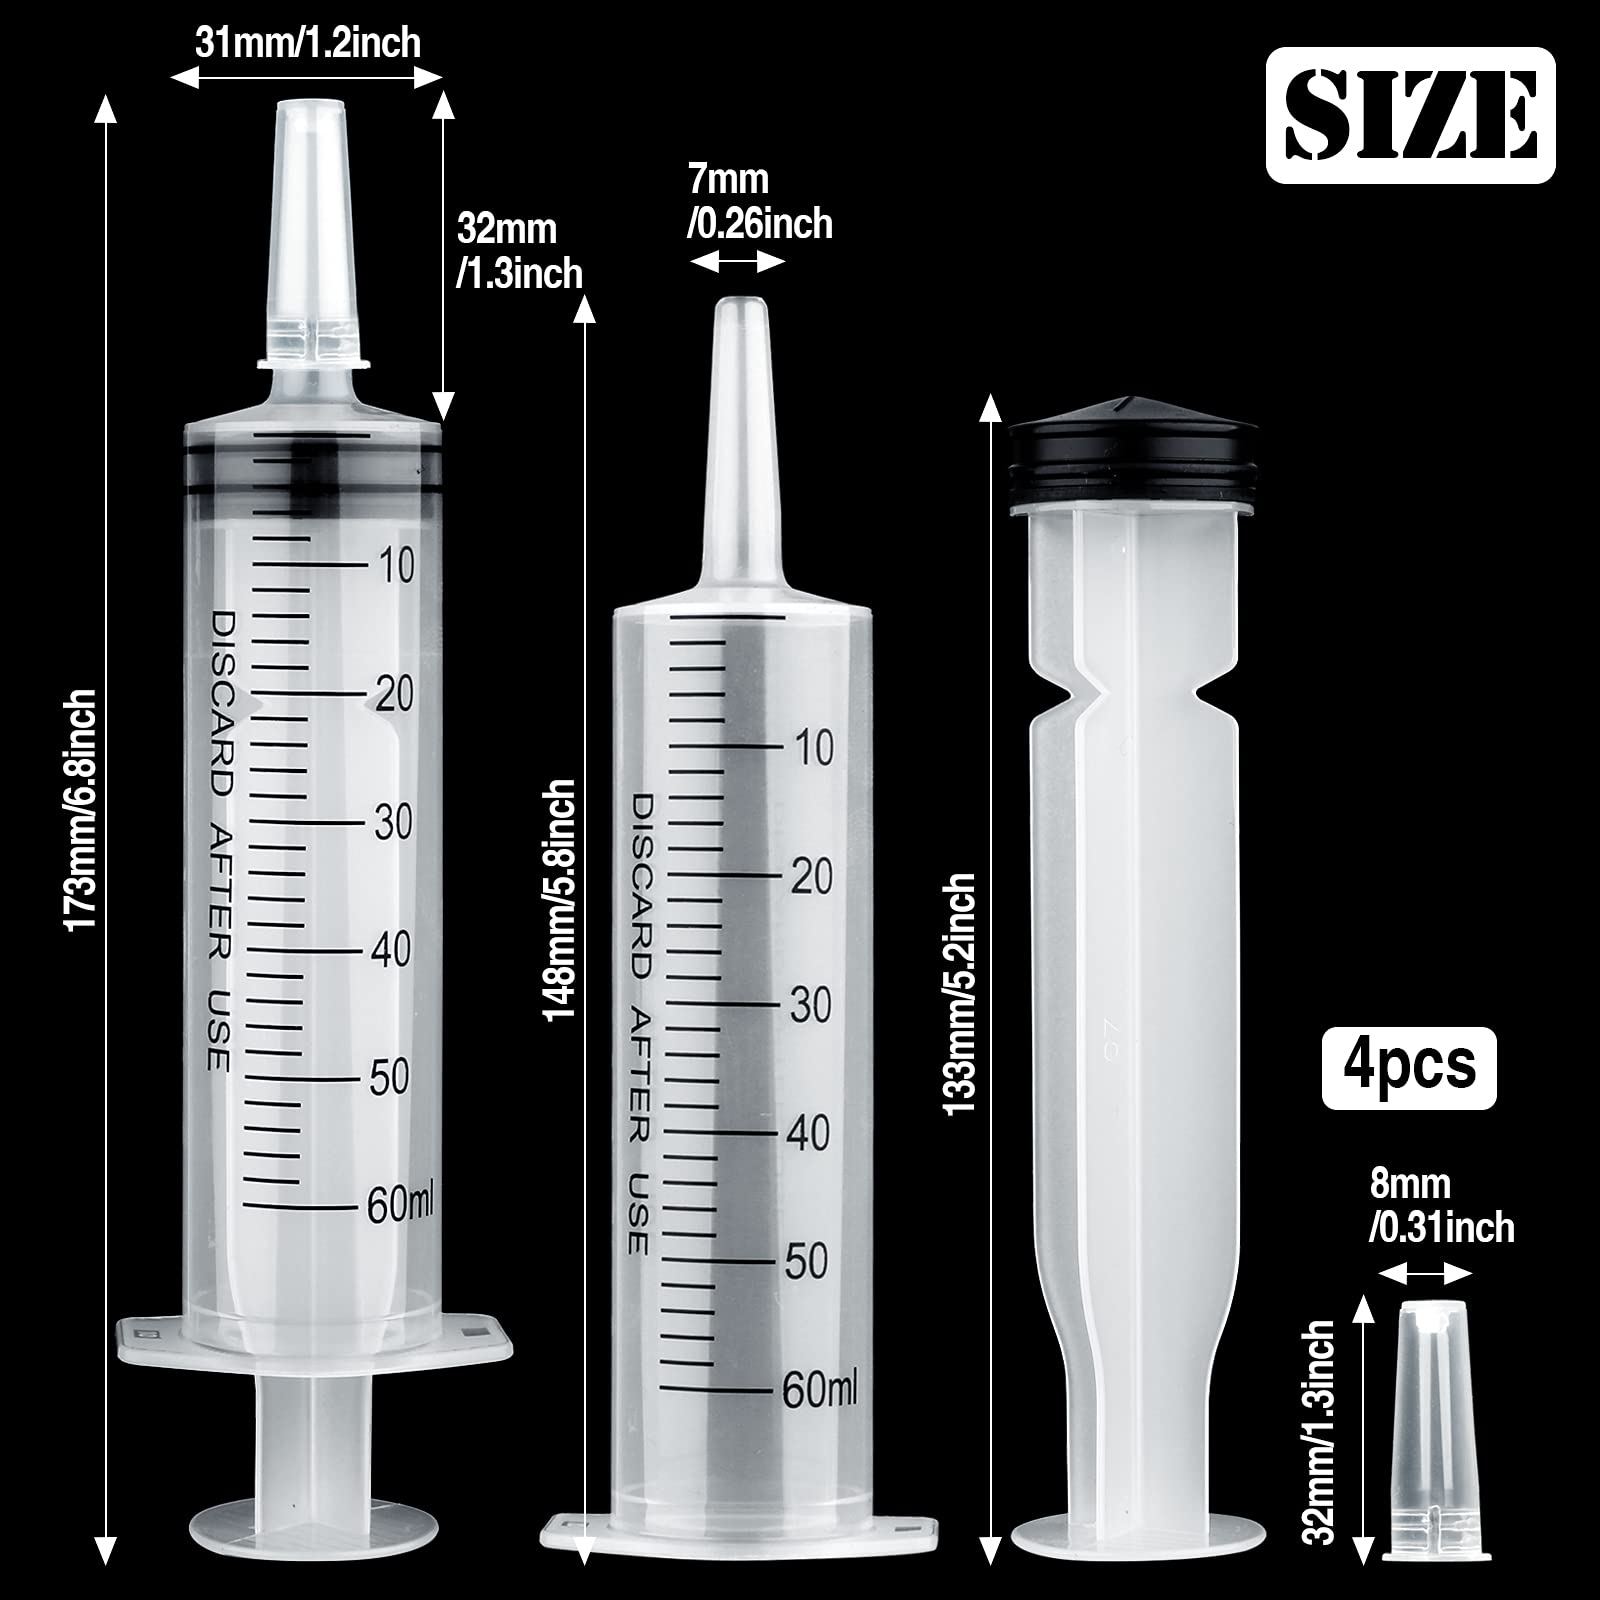 60ml Syringe 4 pack Plastic Syringe with Cap Feeding Syringe for Pets Individually Packaged Syringes Measuring Syringe Sterile for Labs, Food, Dispensing, Watering